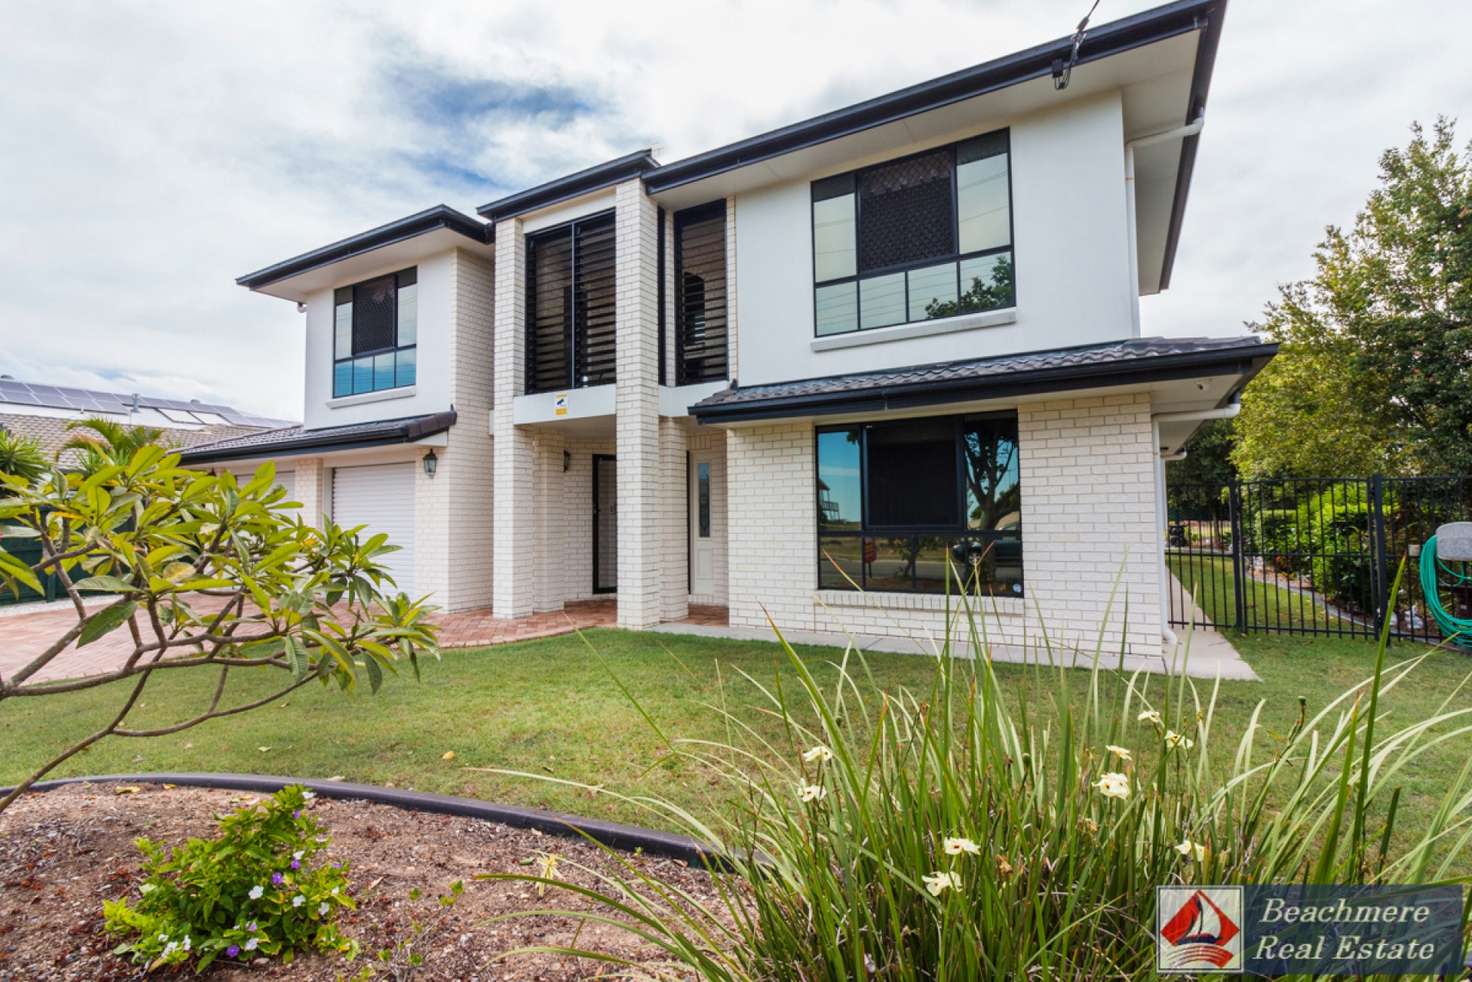 Main view of Homely house listing, 62 Biggs Avenue, Beachmere QLD 4510